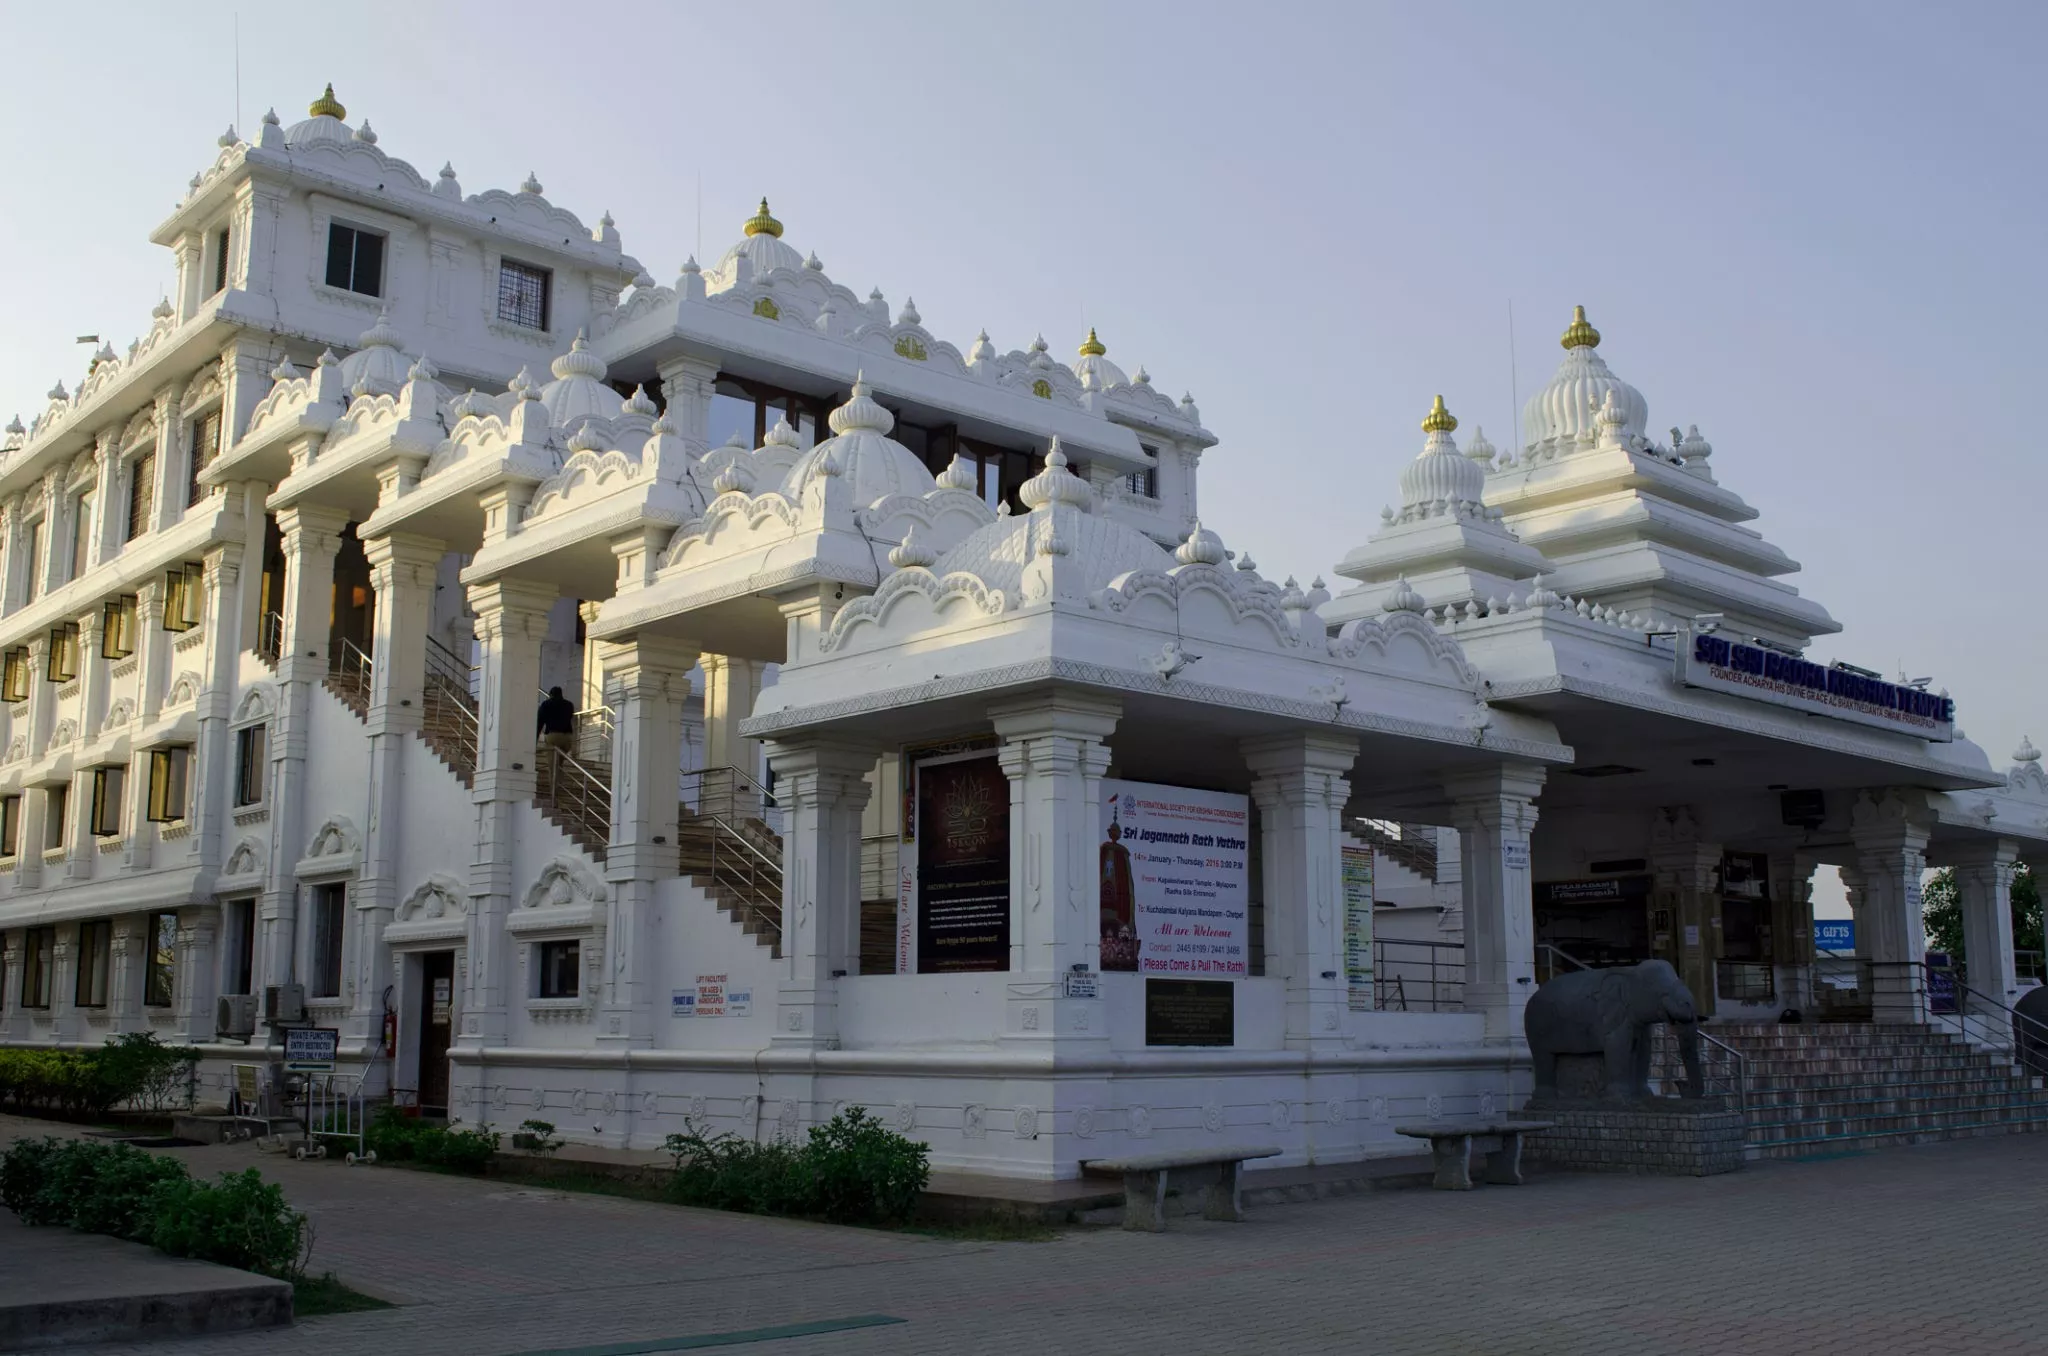 Iskcon in India, Central Asia | Architecture - Rated 3.9